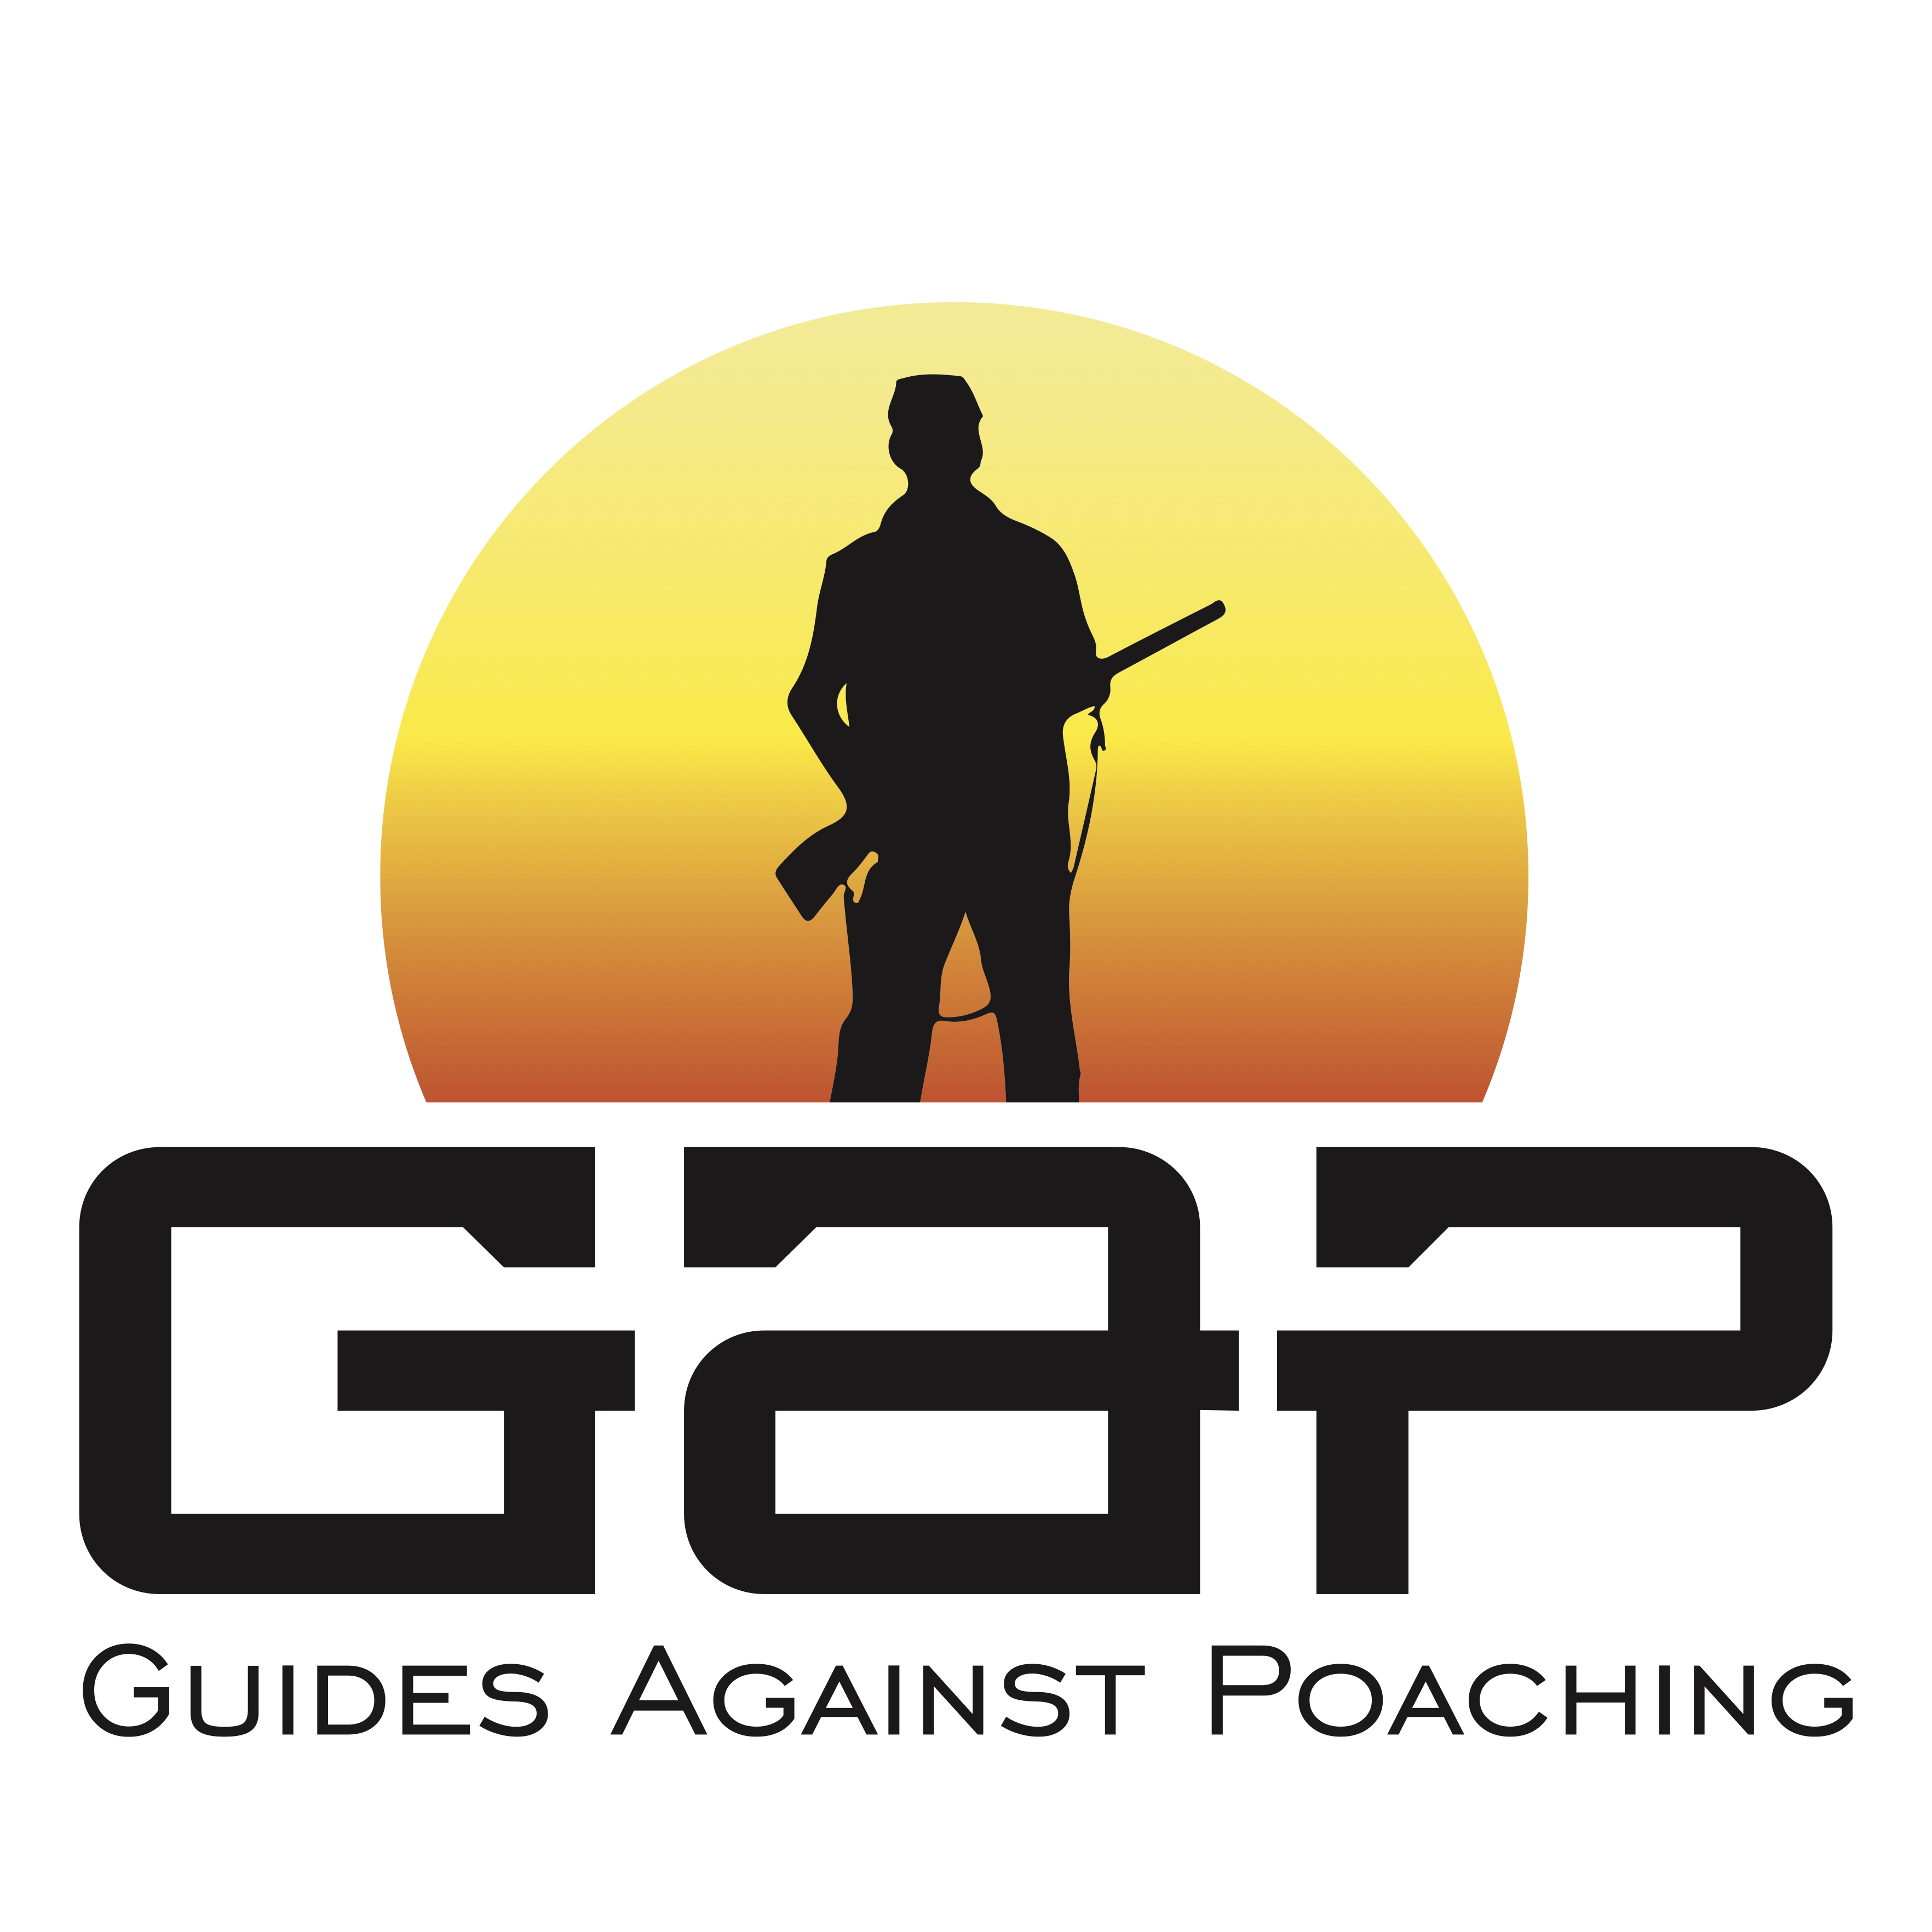 Guides Against Poaching (G.A.P.)